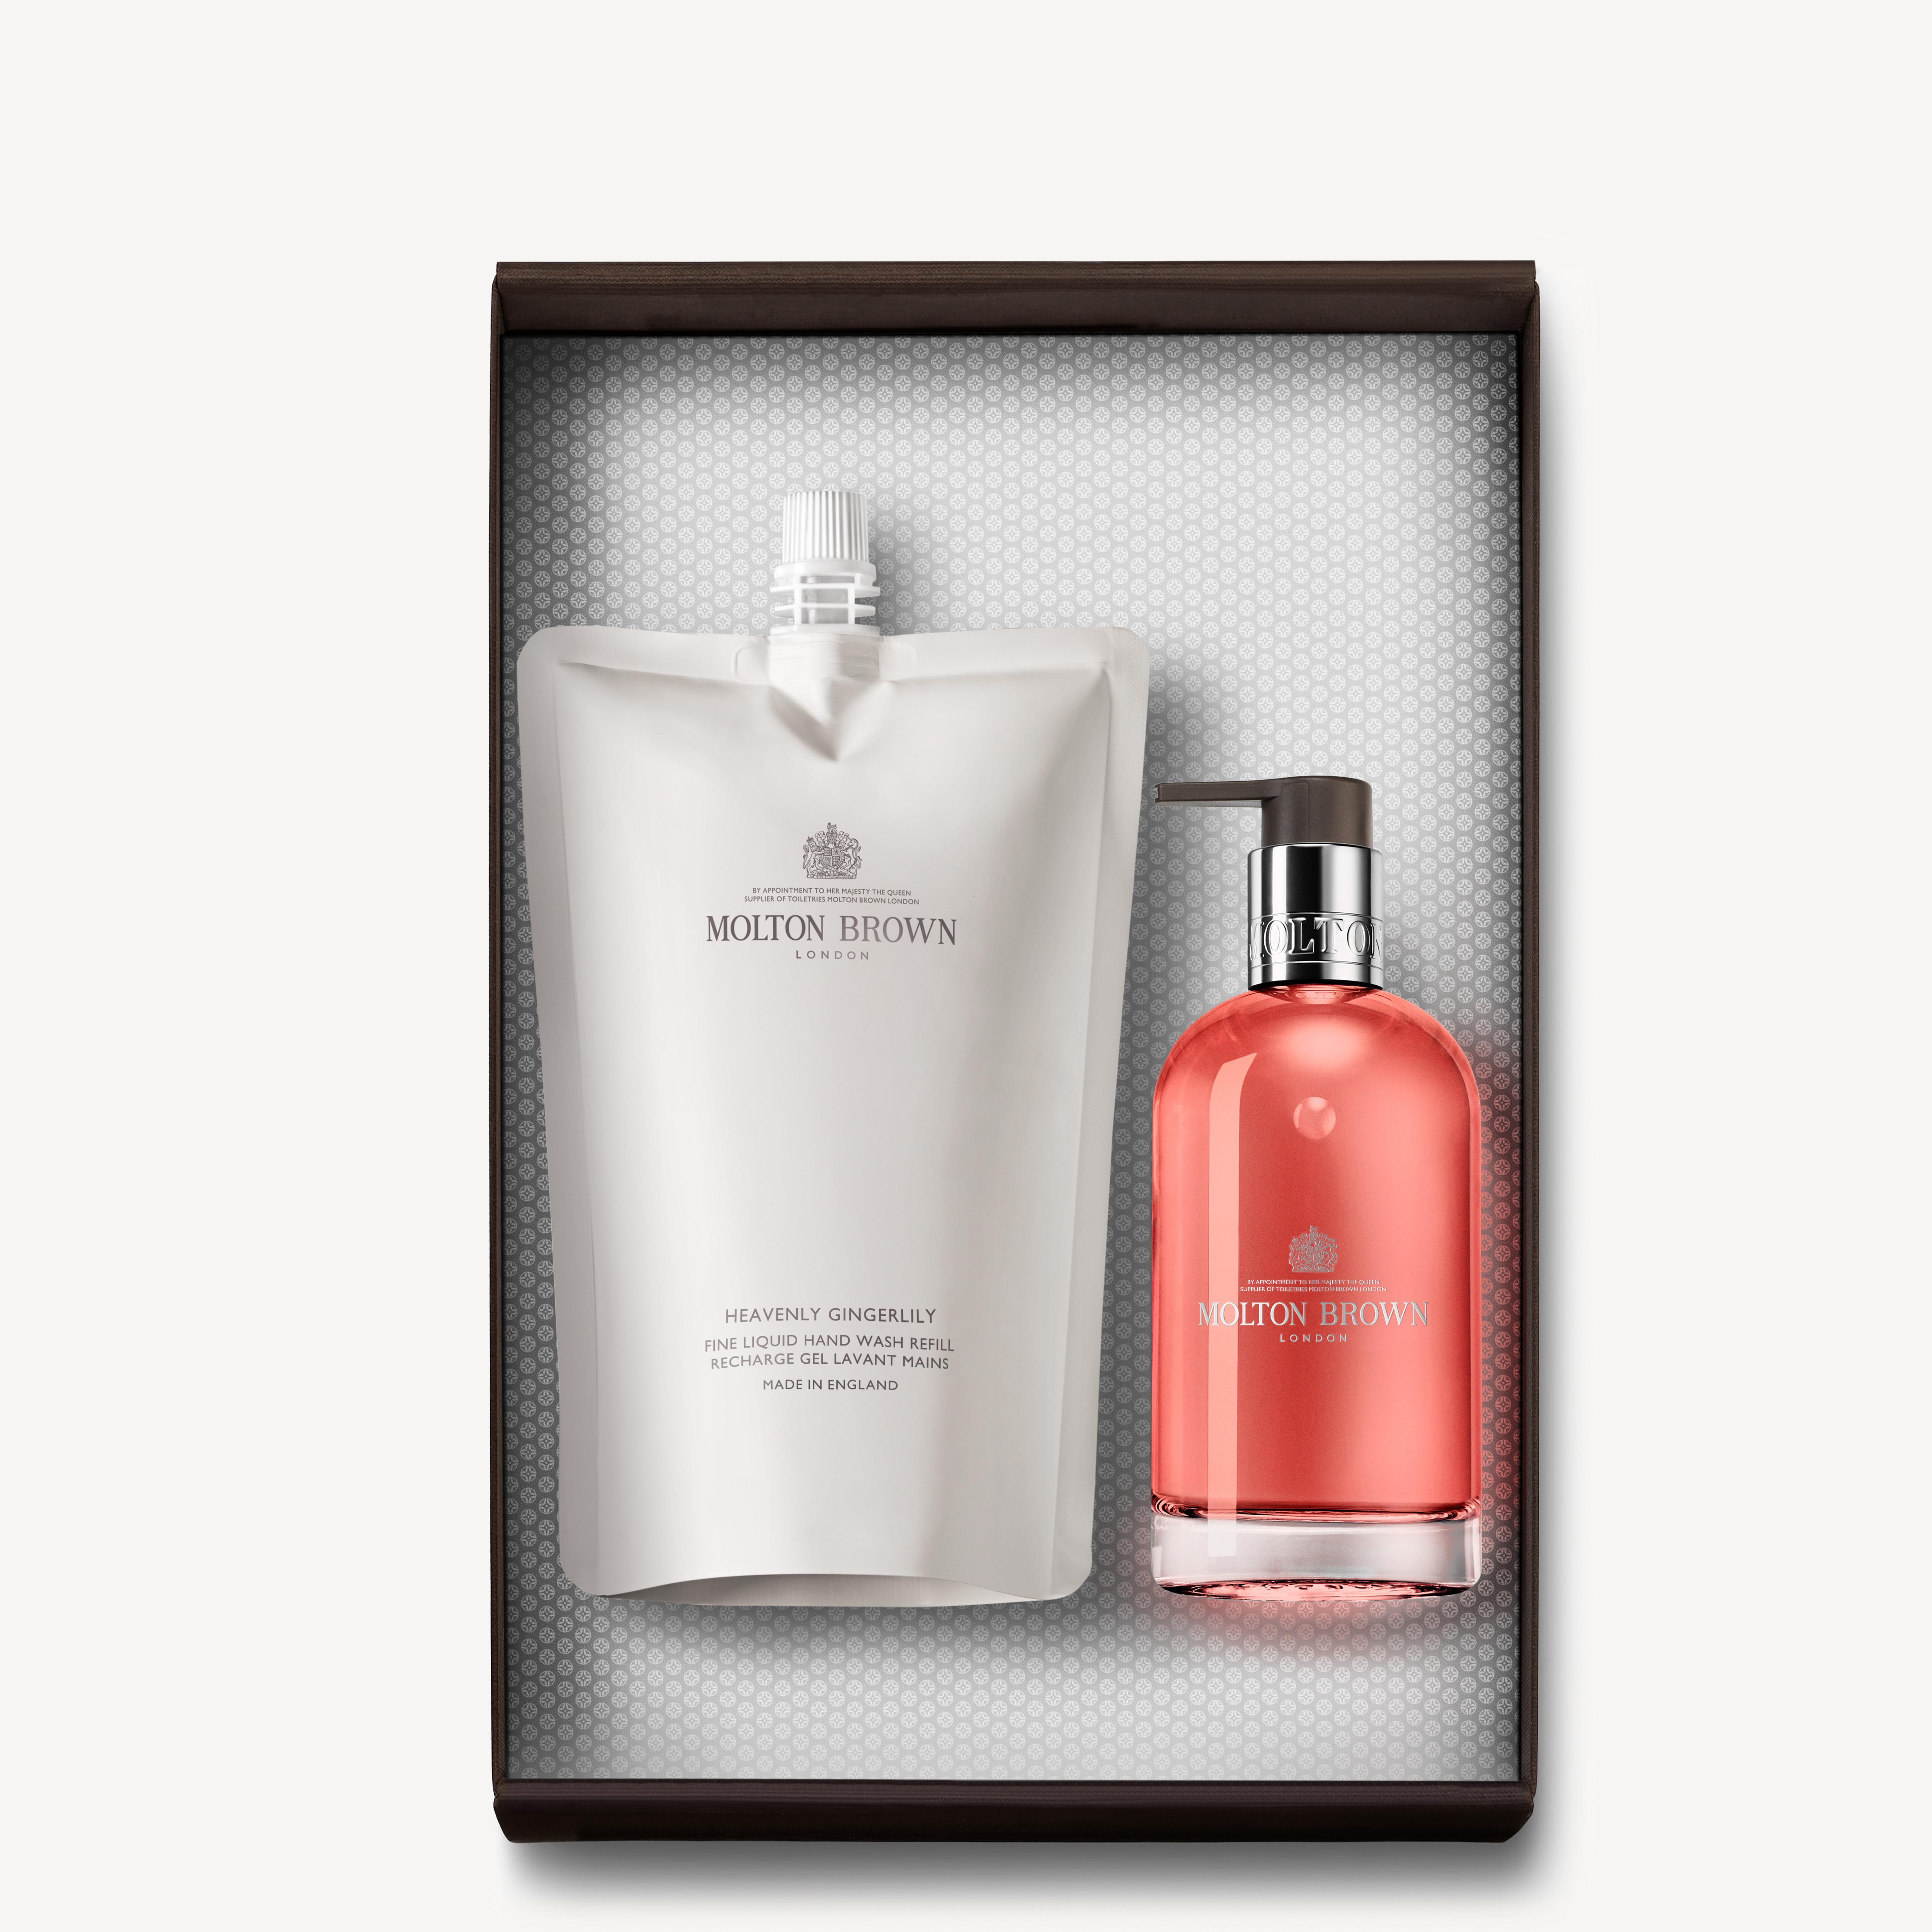 Molton Brown Heavenly Gingerlily Hand Wash Refill Gift Set